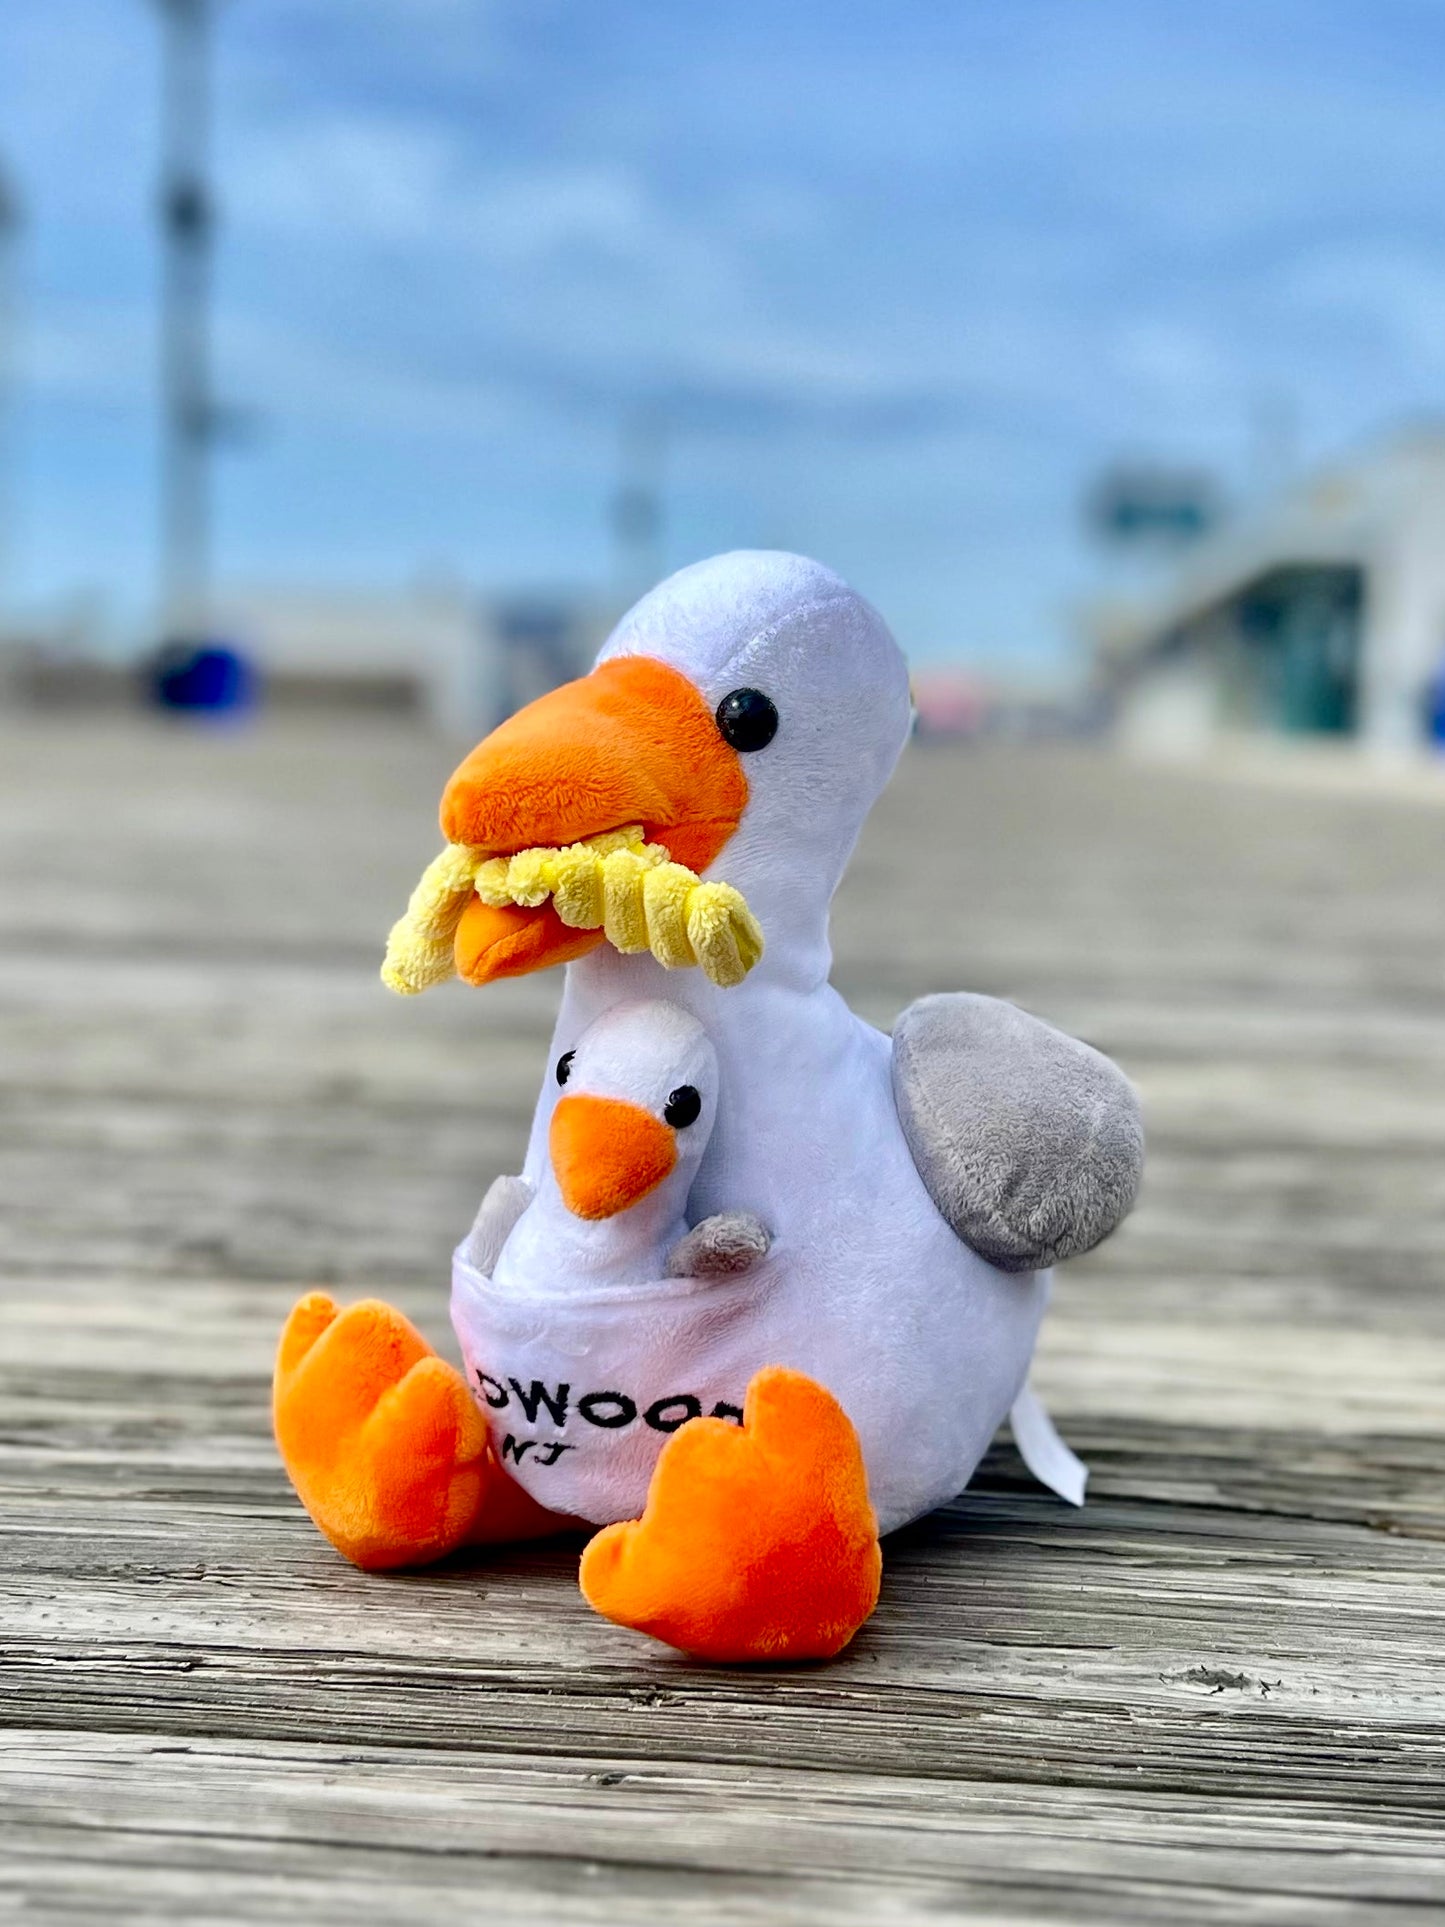 The Seagull Plush Toy with Baby